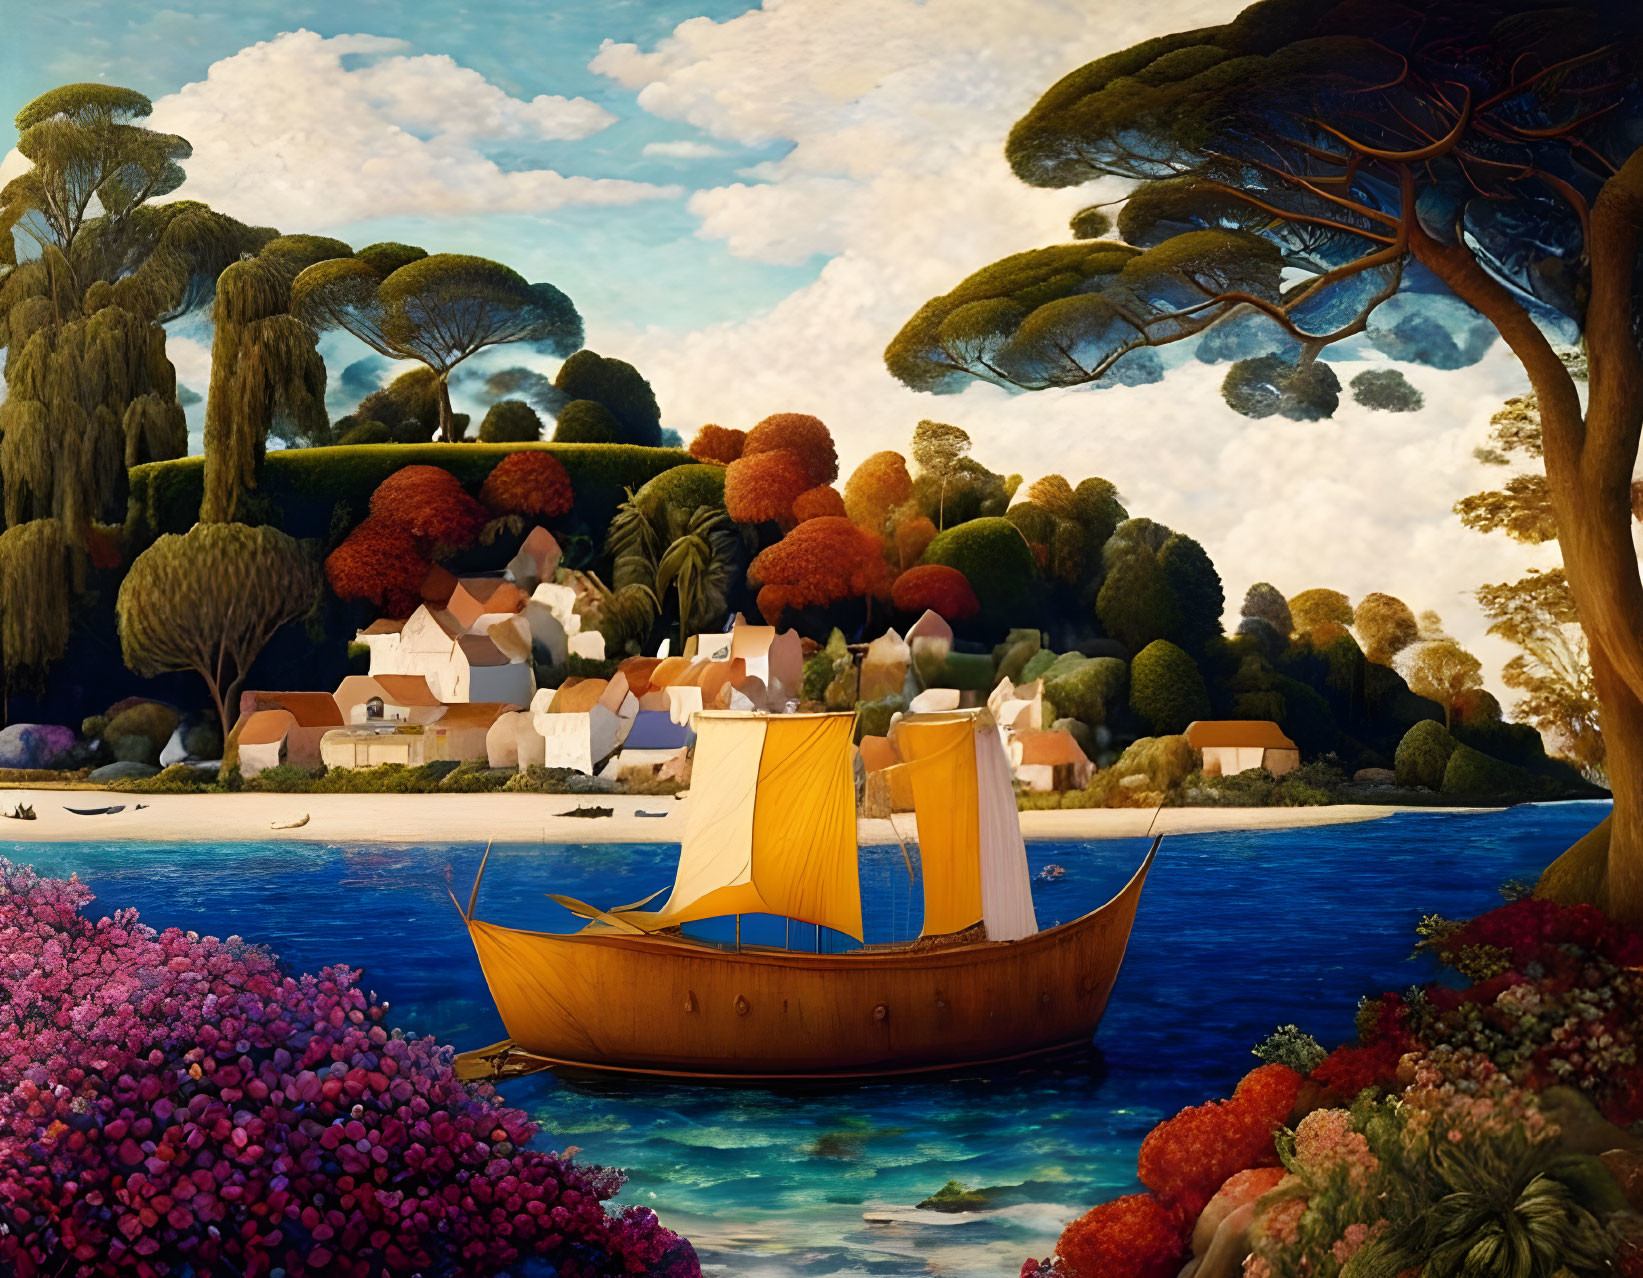 Scenic painting of village by sea with sailboat & lush surroundings